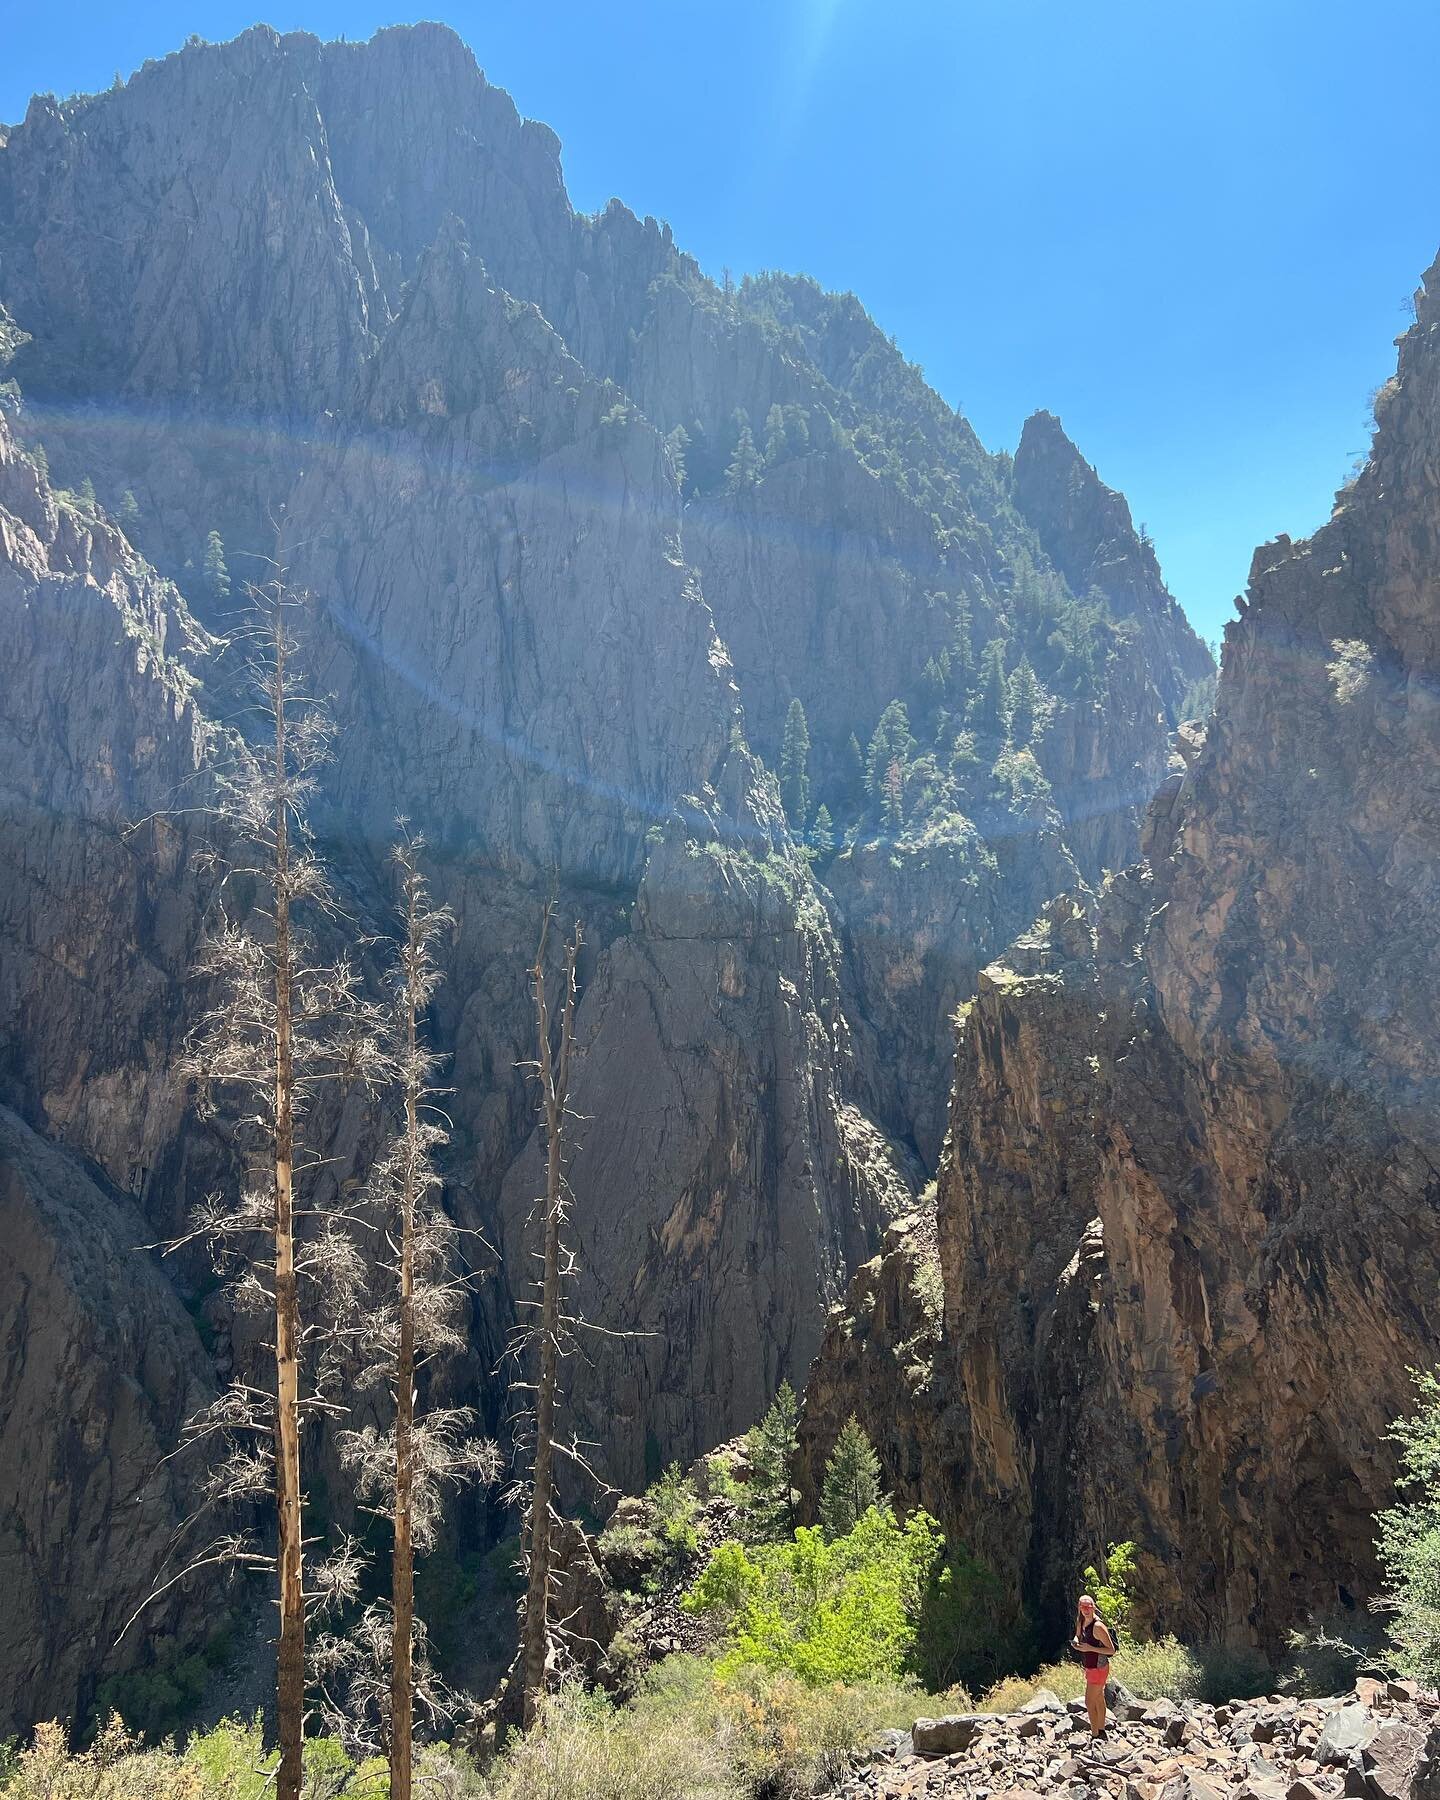 (2/2) The view! What a gorgeous and severe beauty&hellip;. A canyon like no other&hellip;

#blackcanyonofthegunnison #nationalpark #wilderness #beauty #vistas #gunnisonriver #explore #colorado